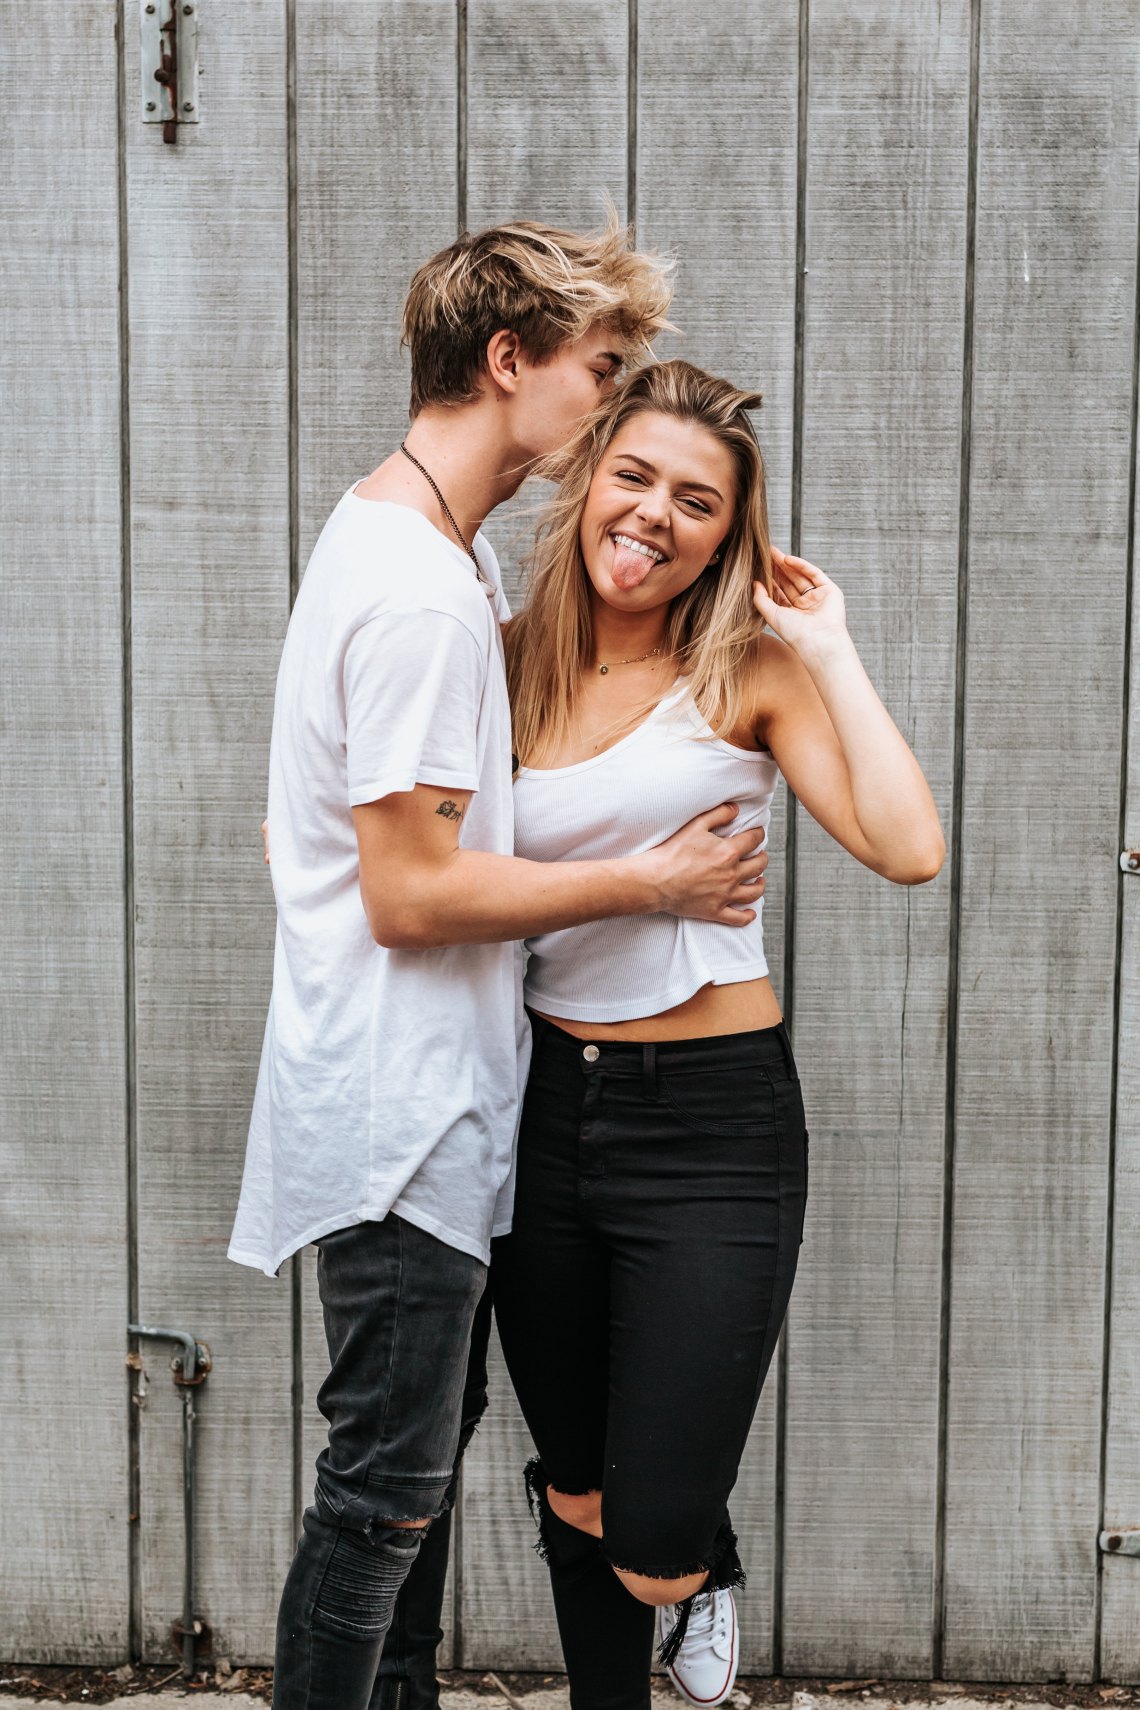 6 Ways To Be The Best Girlfriend He's Ever Had